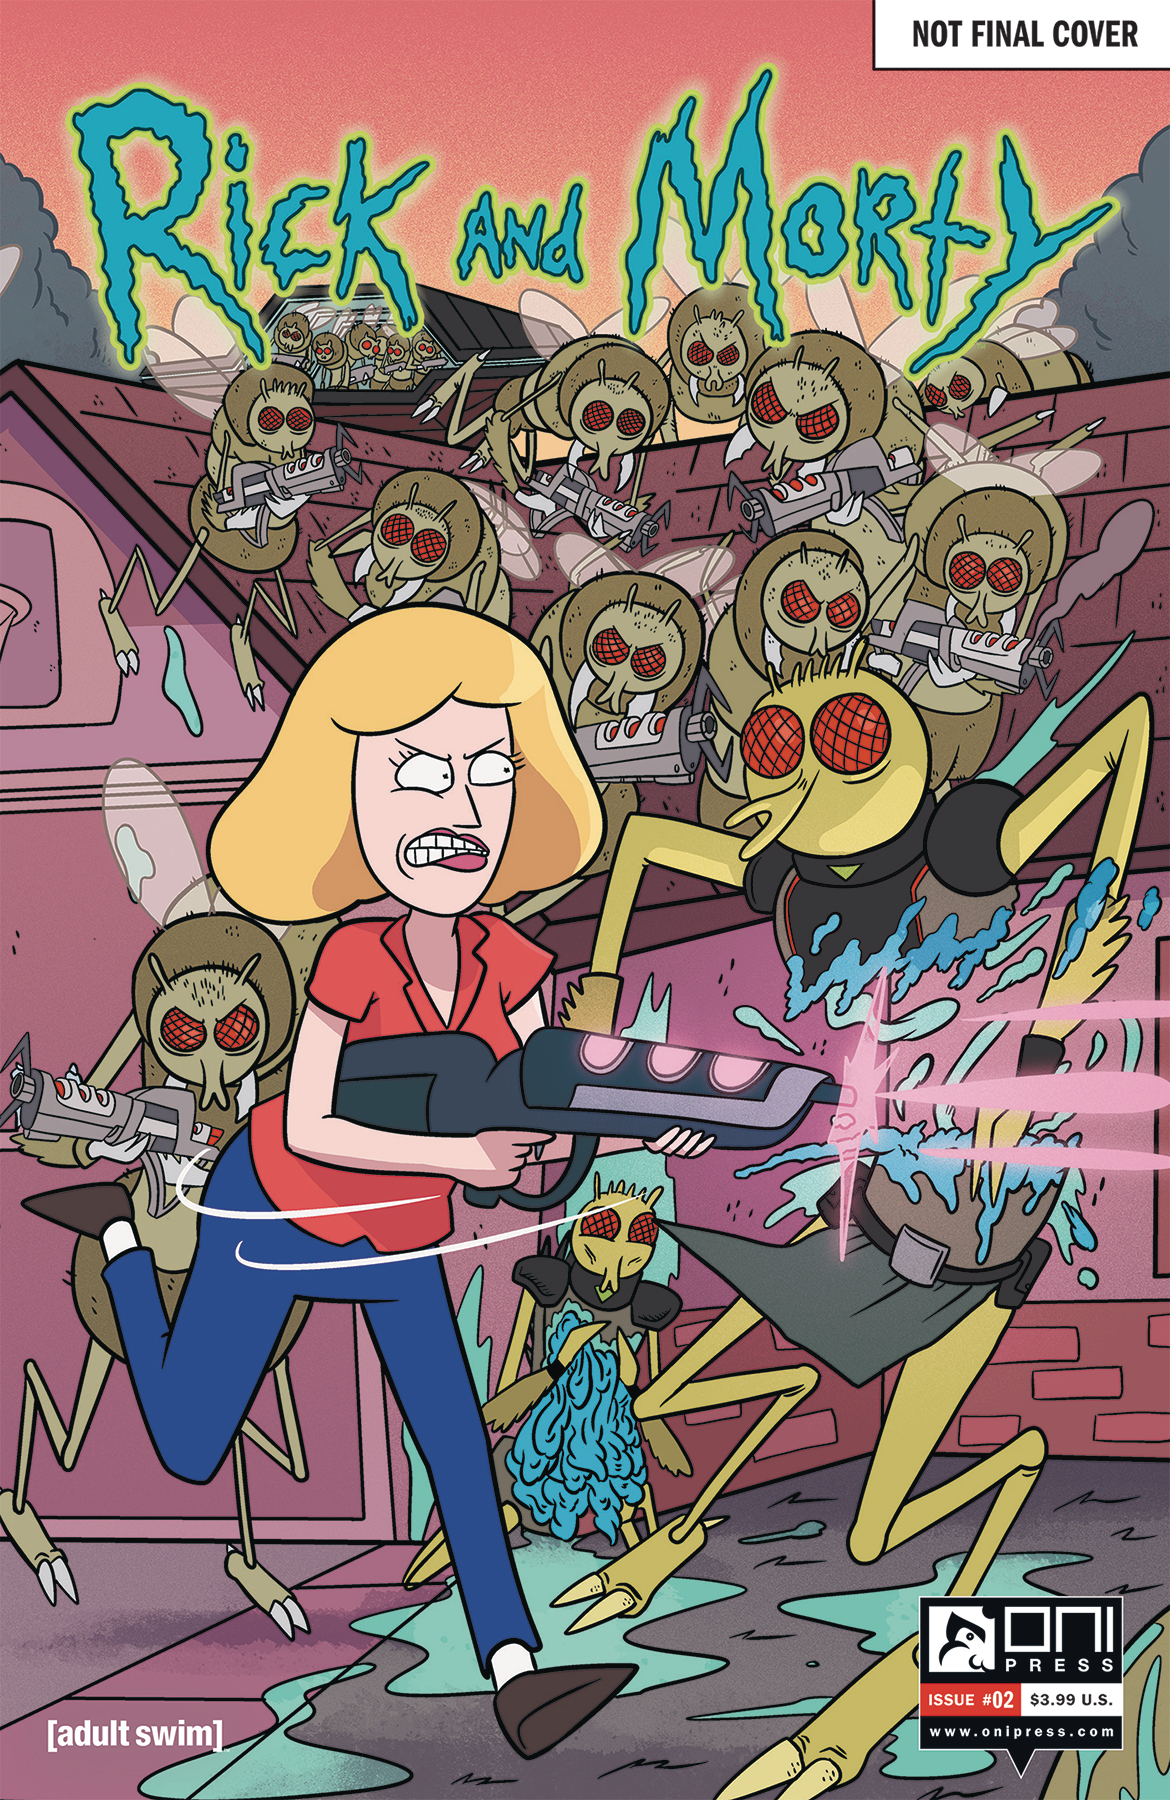 RICK & MORTY #2 50 ISSUES SPECIAL VAR